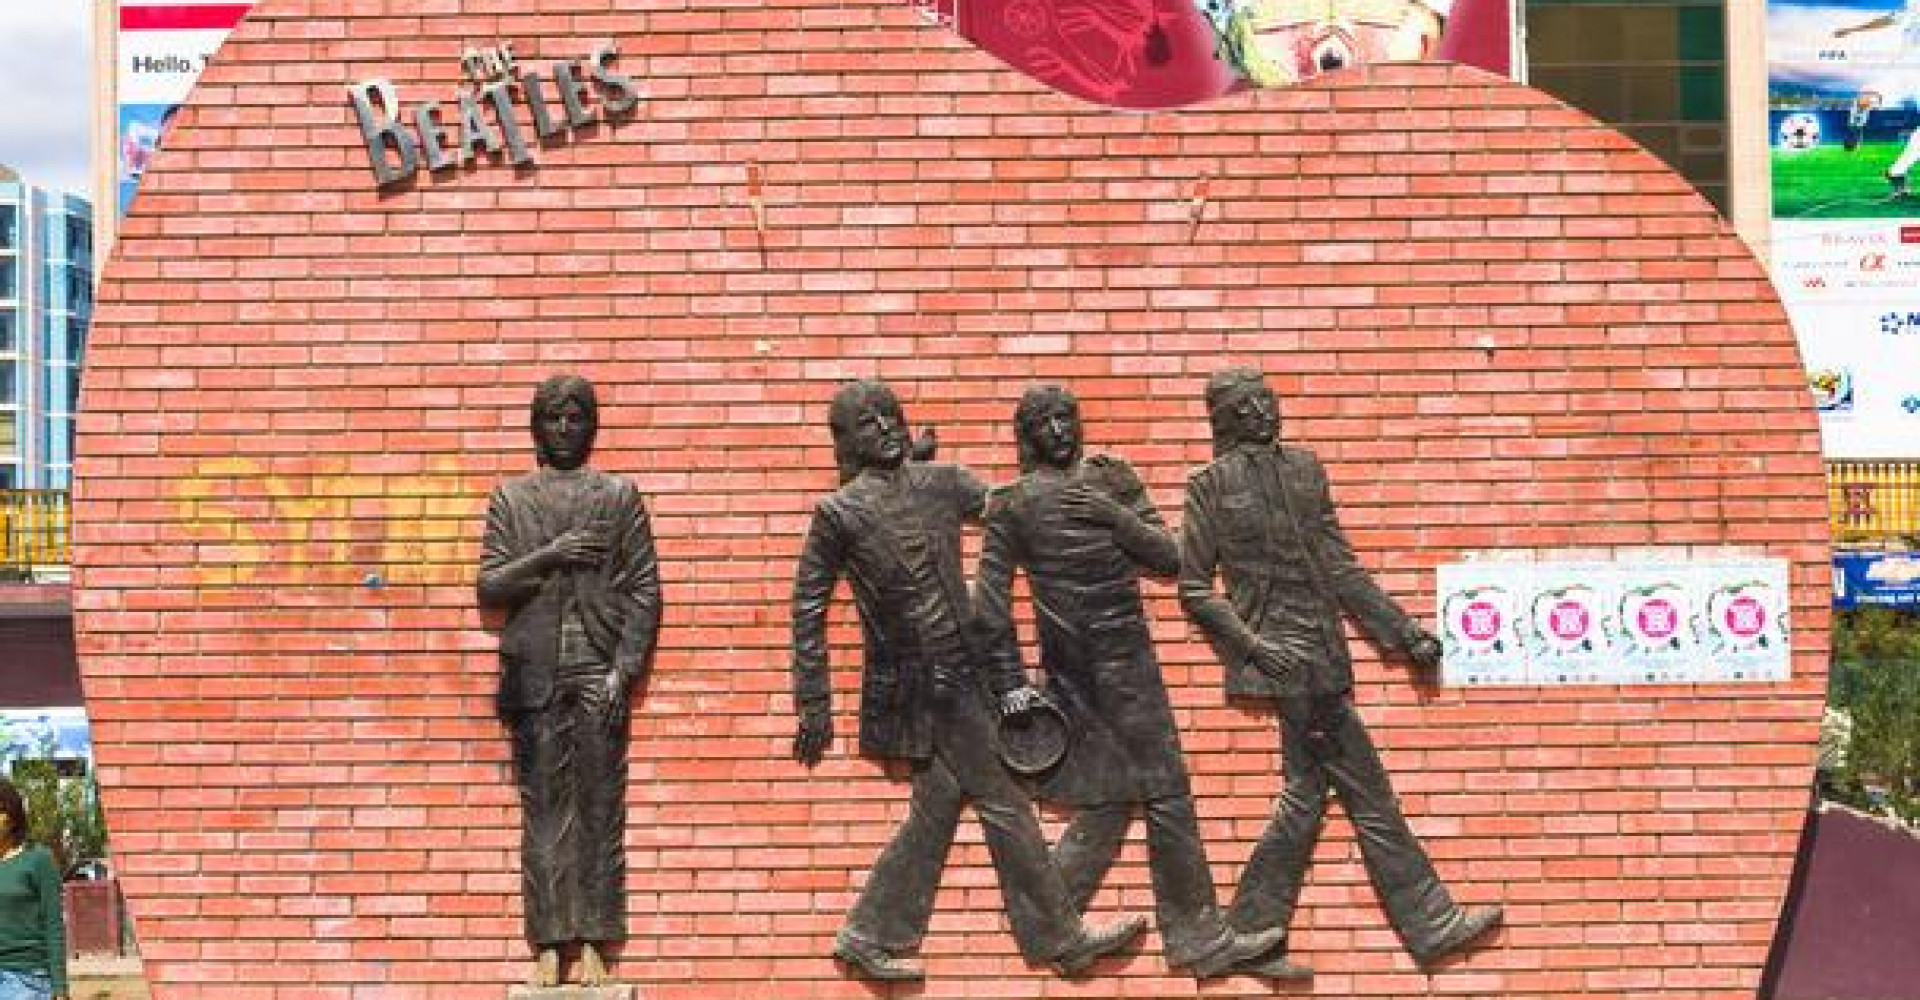 THE BEATLES MONUMENT